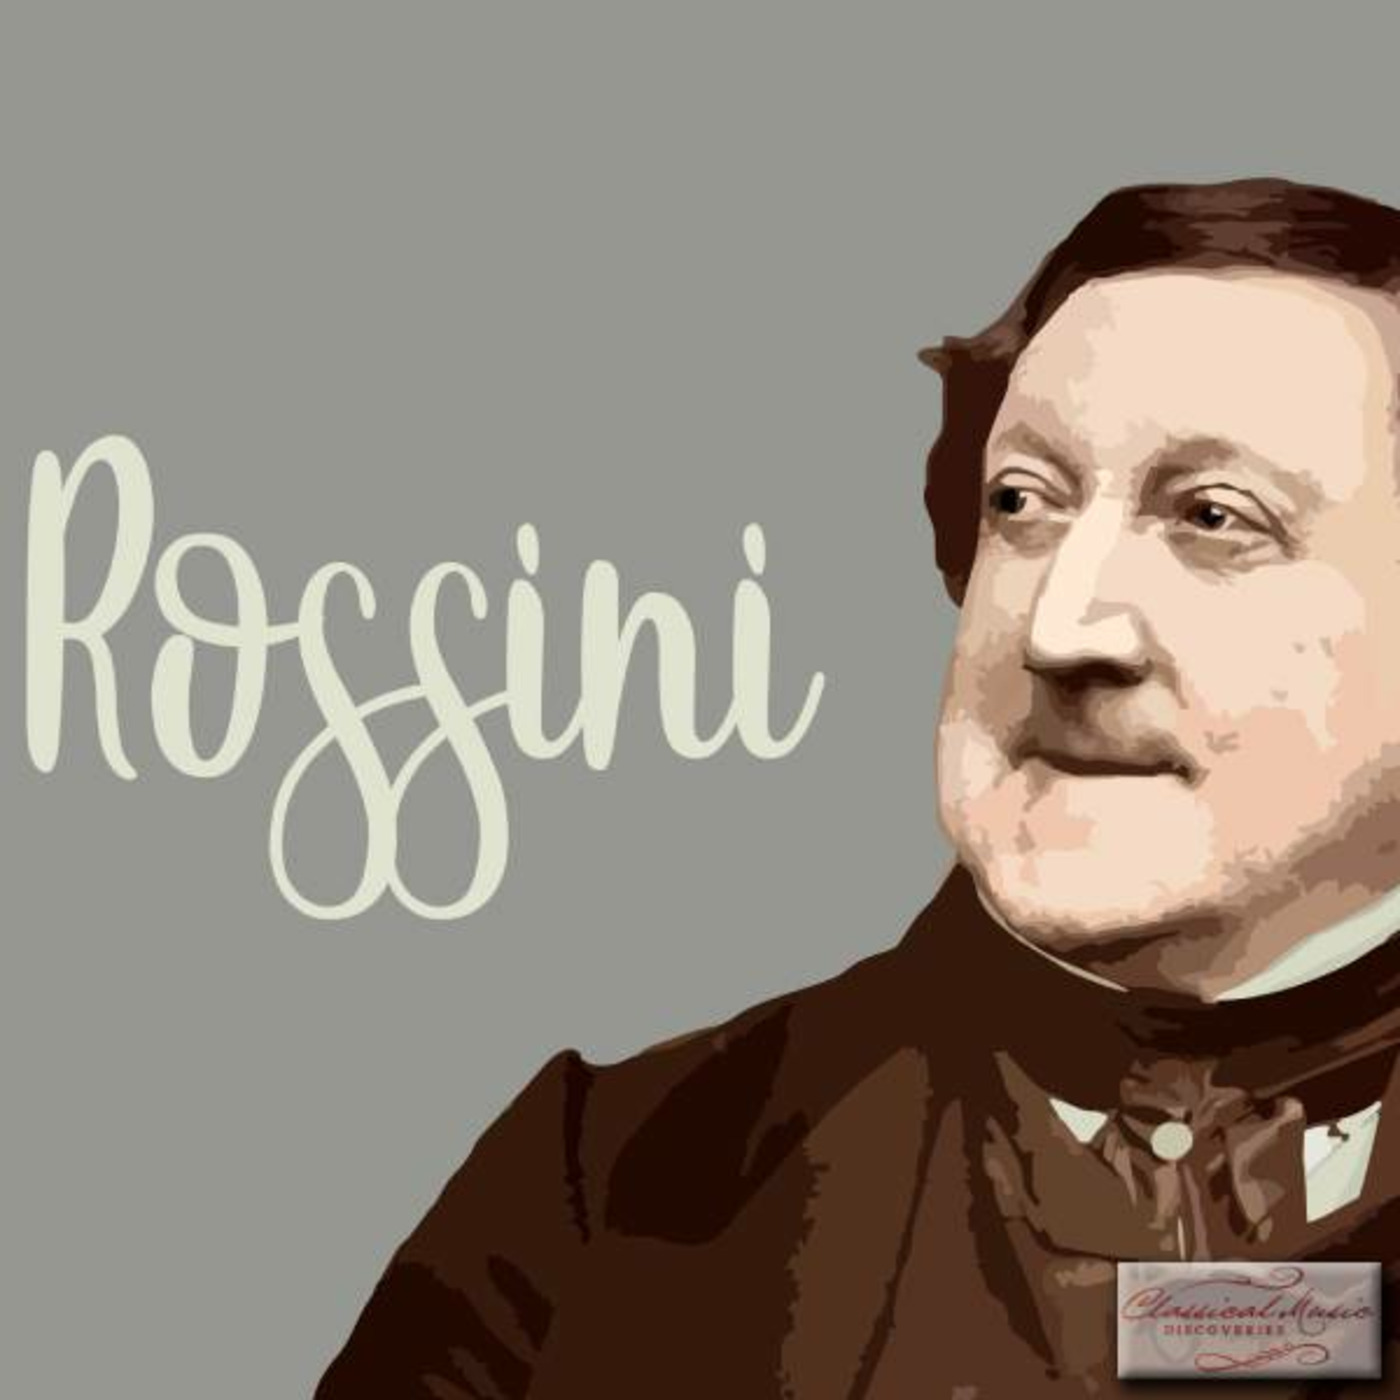 Episode 223: 18223 Rossini - featured opera composer for March 2022